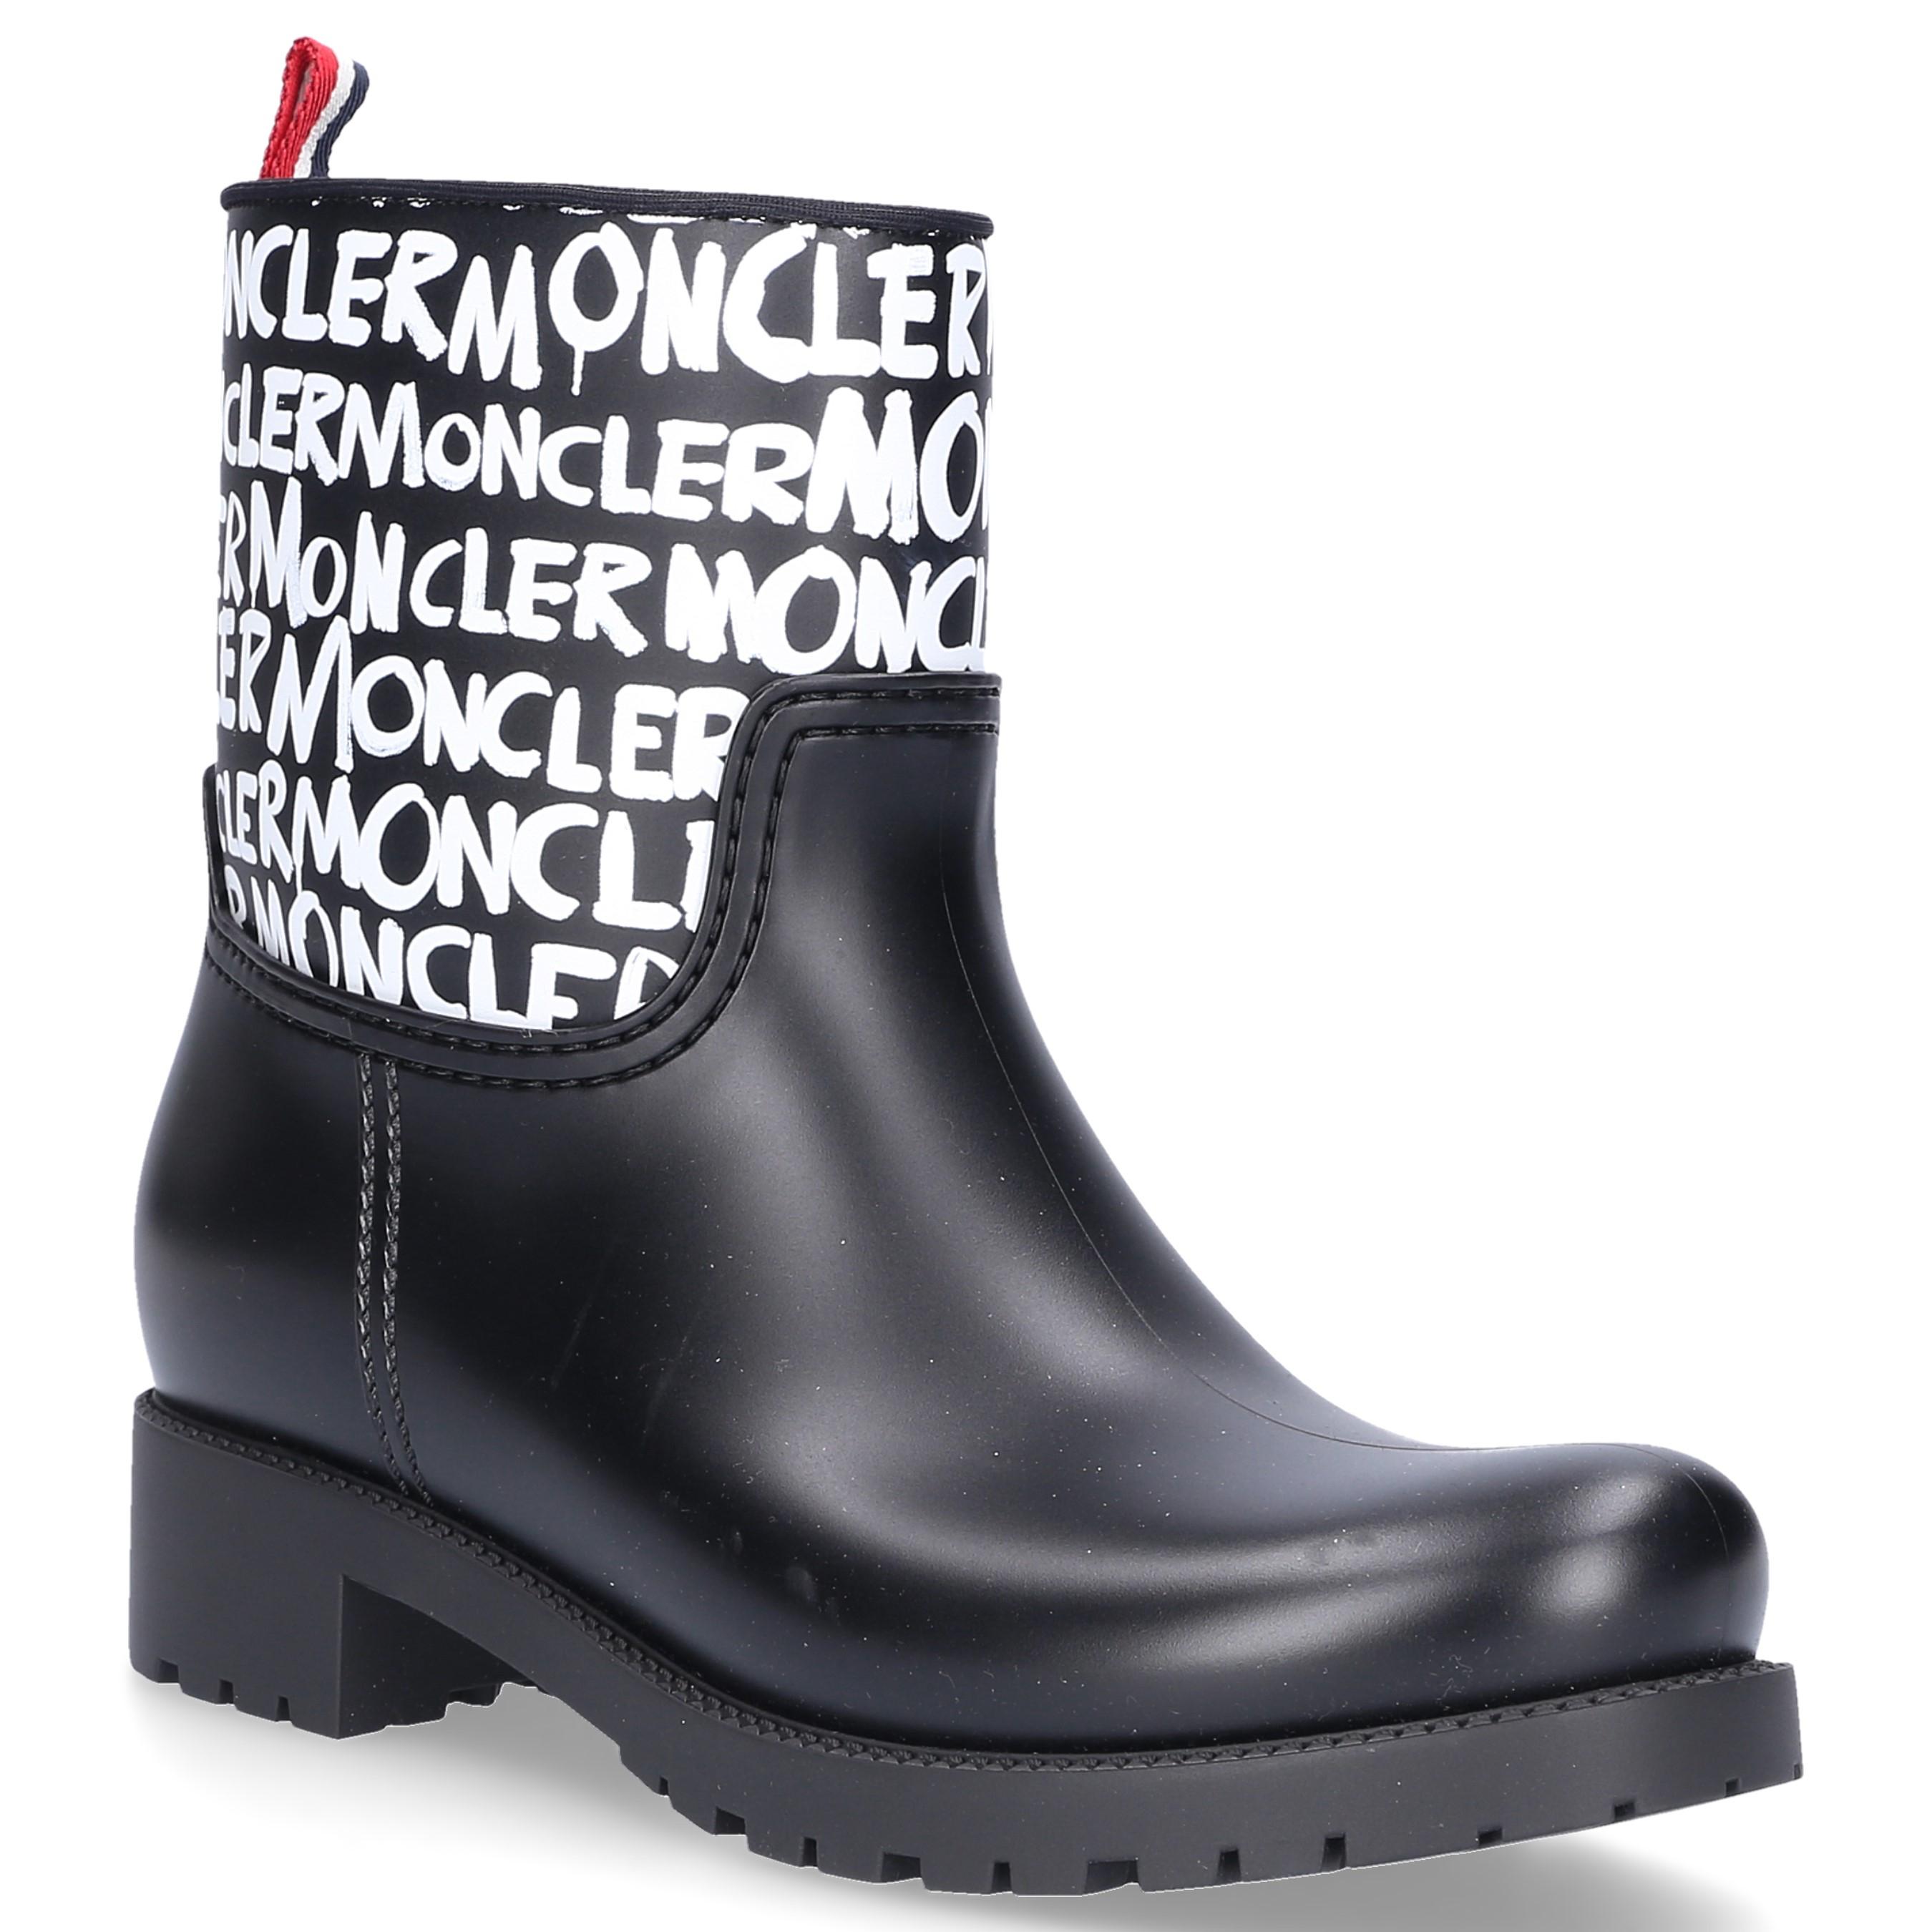 Moncler Neoprene Ginette Rain Boots in Charcoal (Black) - Save 50 